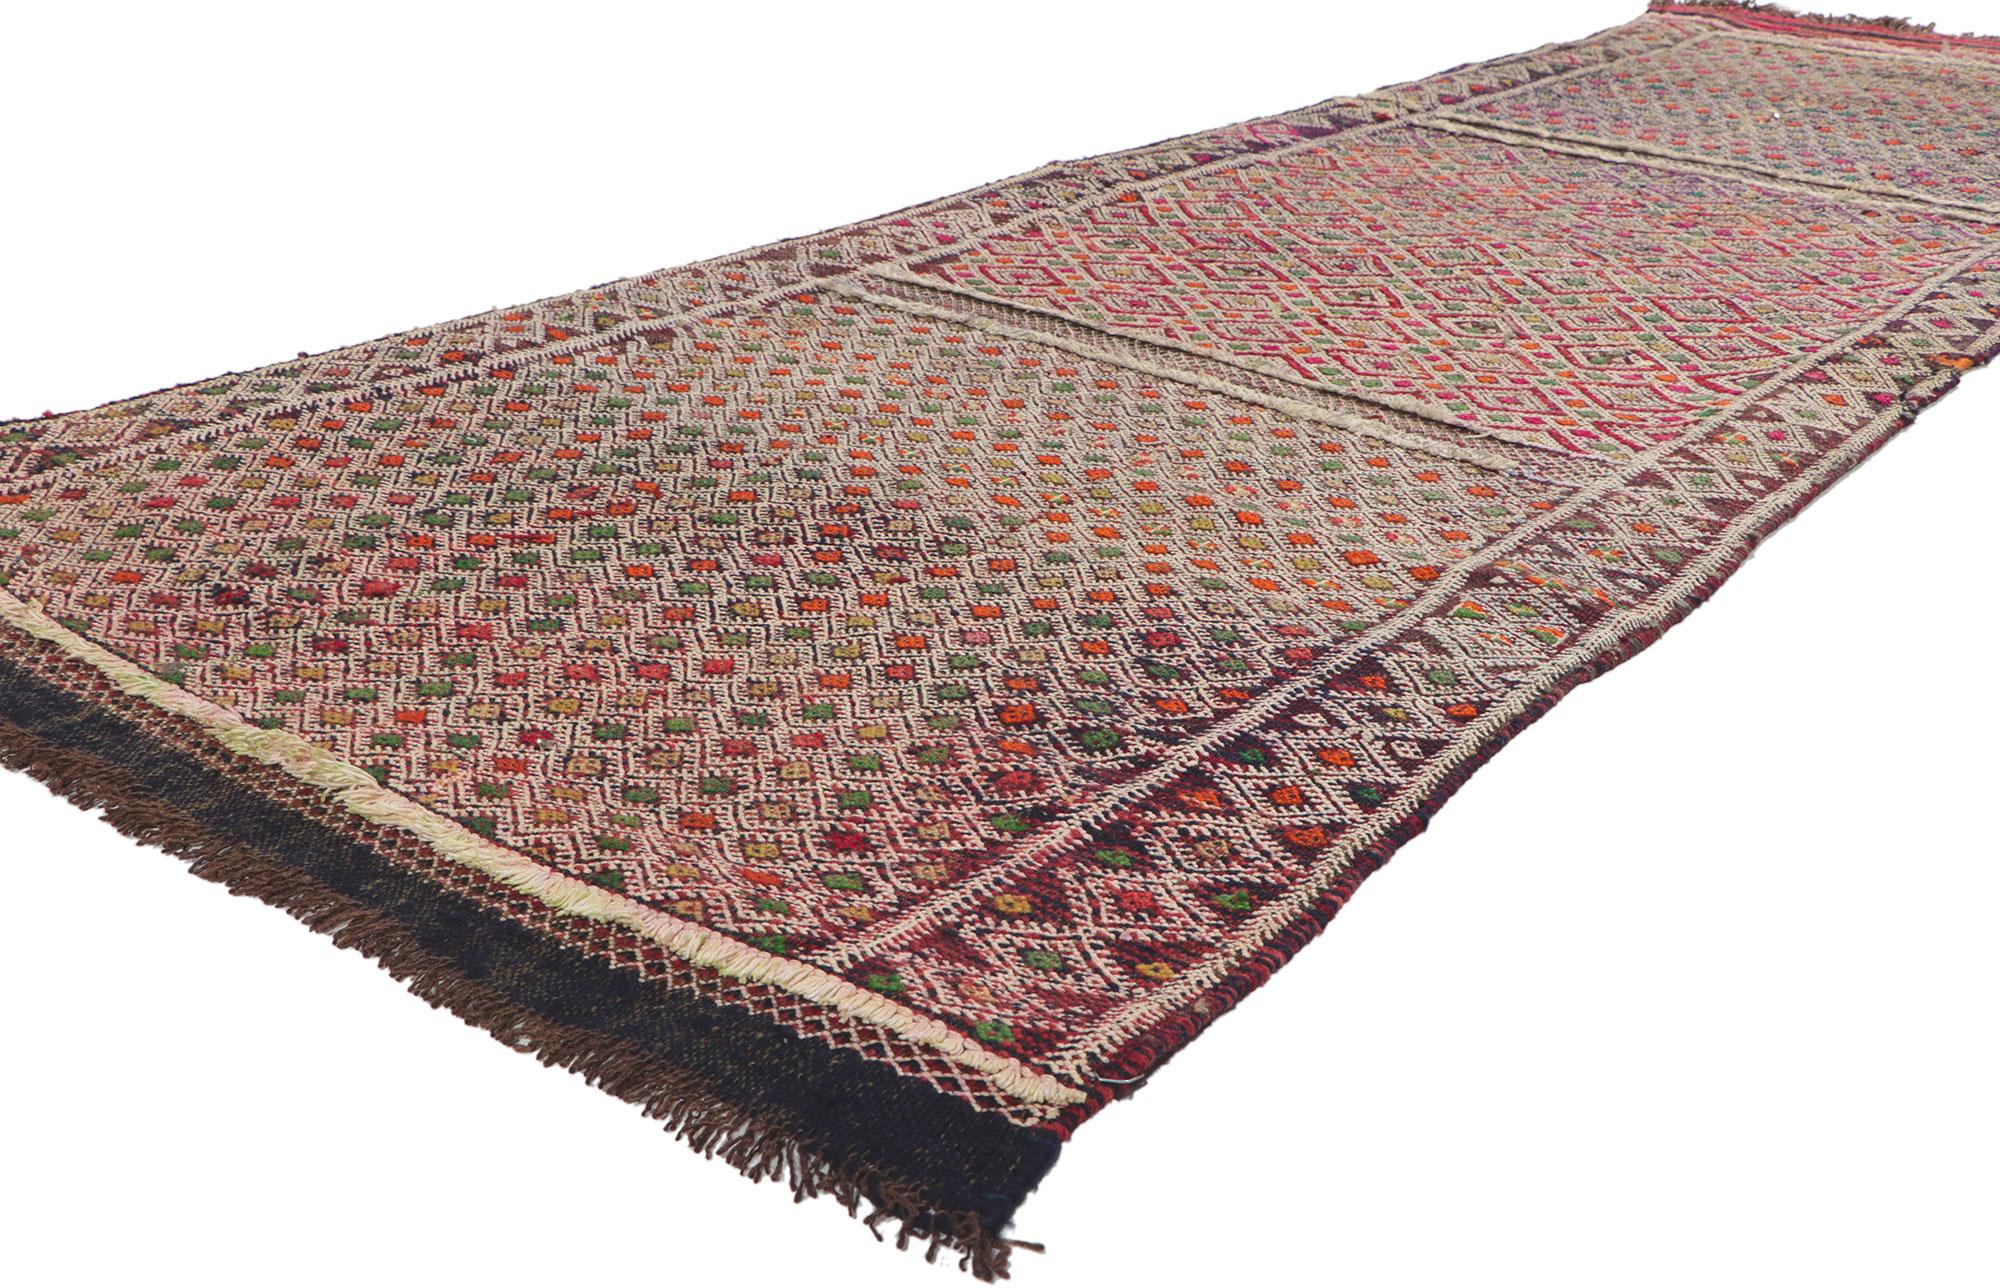 21716 Vintage Zemmour Moroccan Kilim runner, 03'03 x 09'02. Full of tiny details and tribal style, this hand-woven wool vintage Zemmour Berber Moroccan kilim rug runner is a captivating vision of woven beauty. The abrashed field is composed of